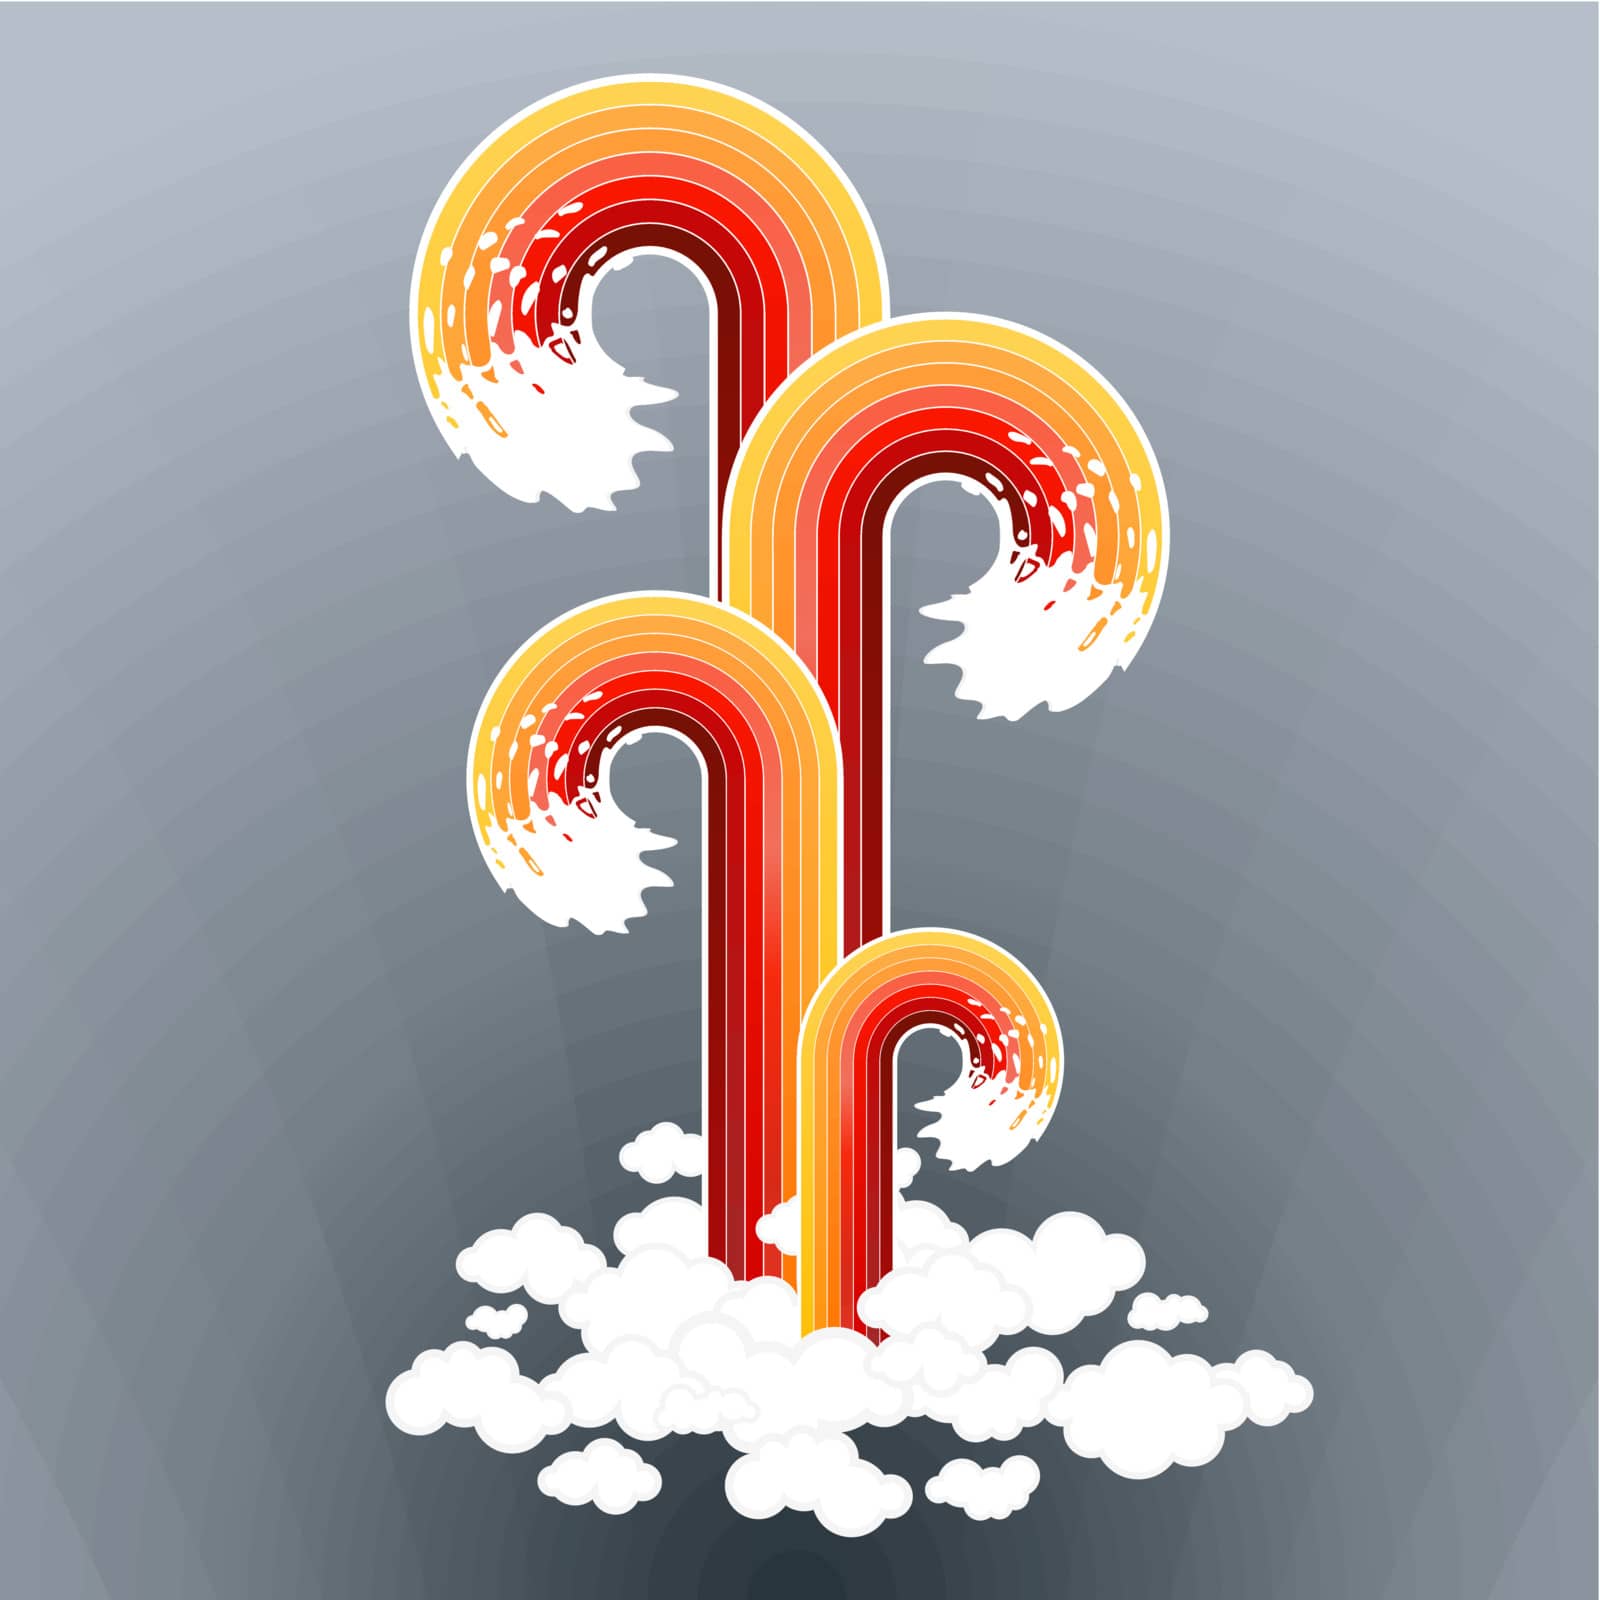 Vector illustration of four splashy lined art design elements exploding from a group of clouds.